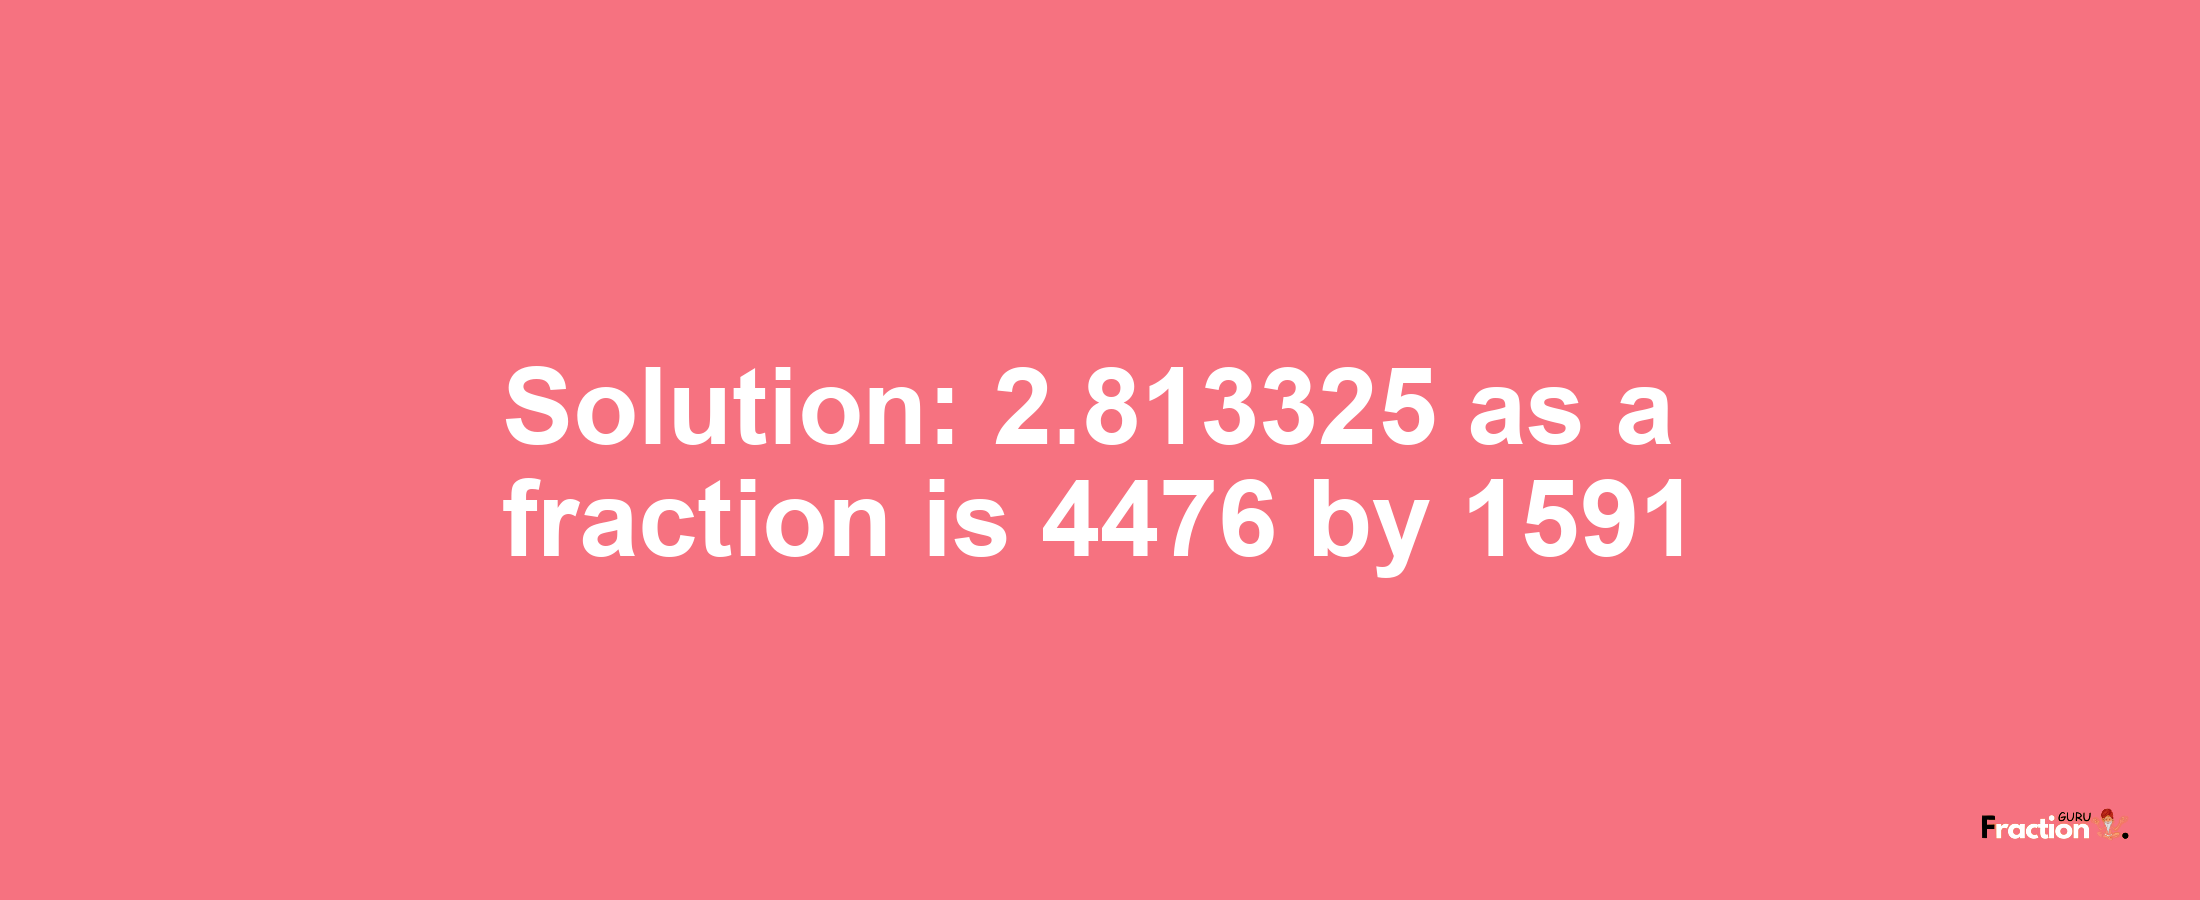 Solution:2.813325 as a fraction is 4476/1591